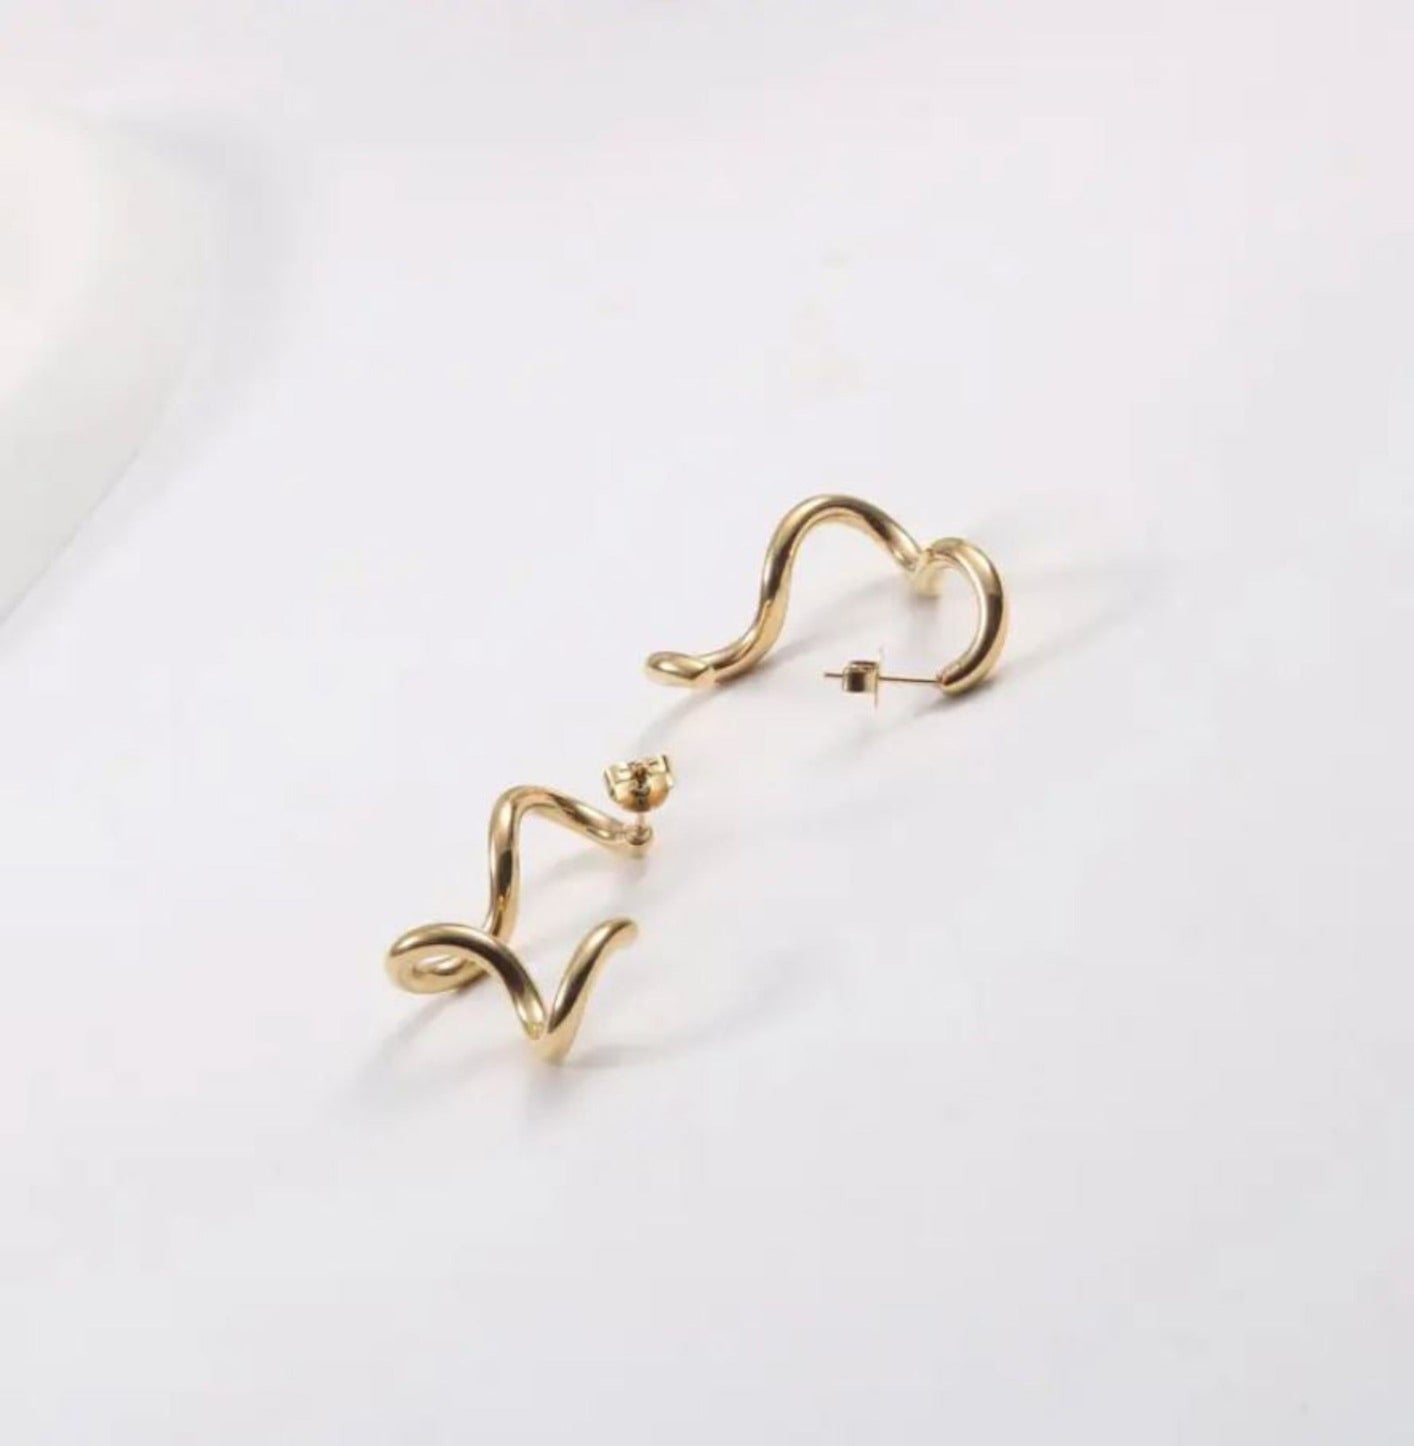 SHAPE EARRINGS earing Yubama Jewelry Online Store - The Elegant Designs of Gold and Silver ! 